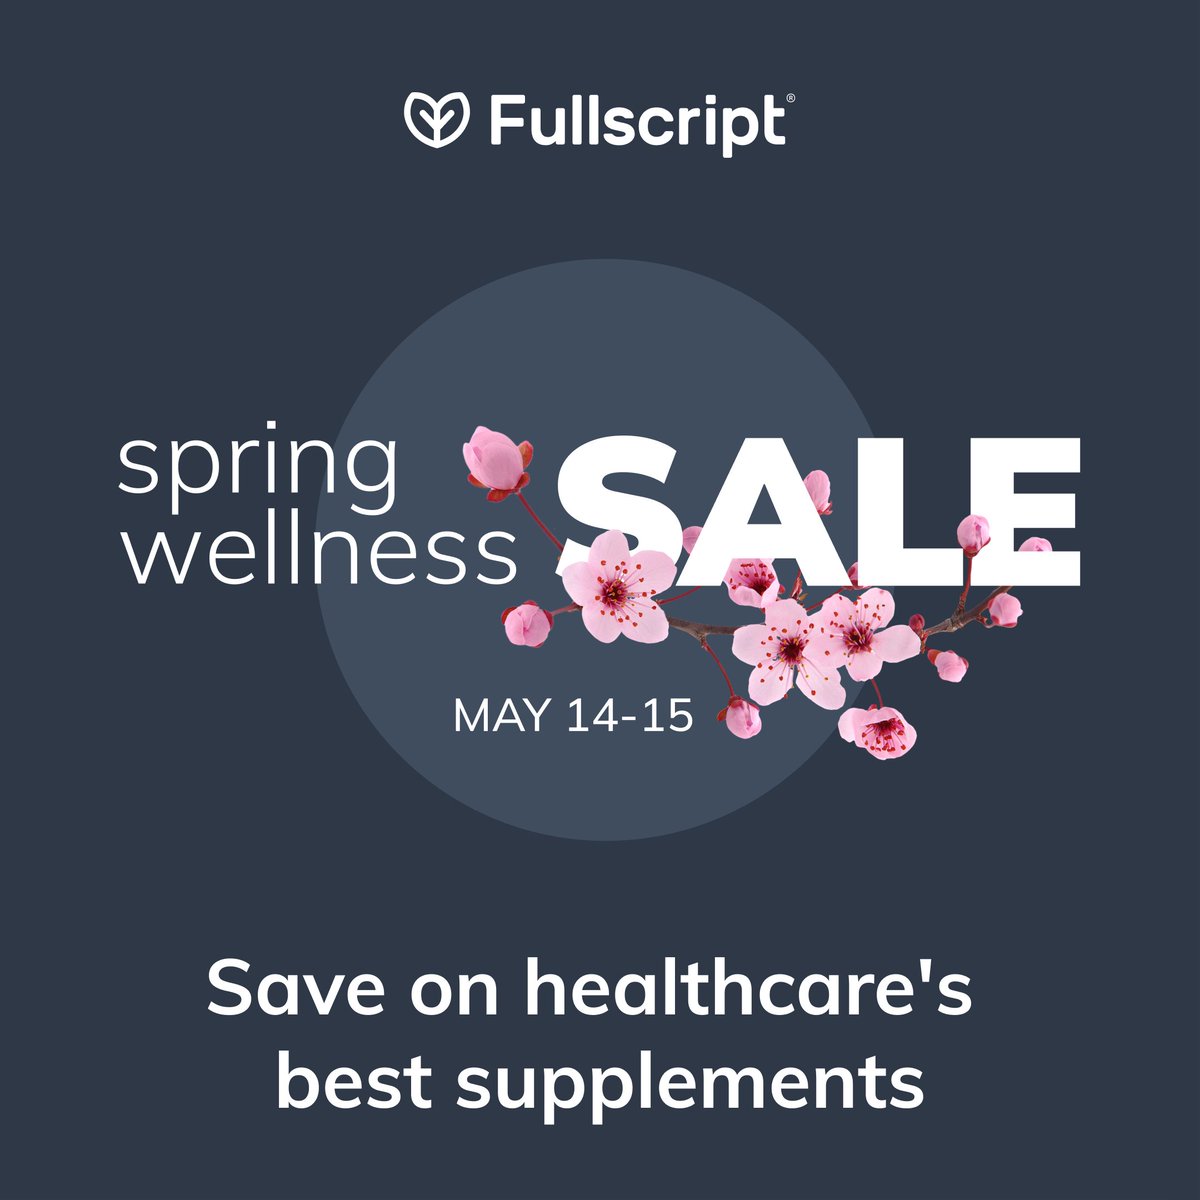 Save on healthcare’s best supplements and wellness products from May 14 –15 only.
Make sure you’re signed up for my @Fullscript online dispensary to save on high-quality products: us.fullscript.com/welcome/dkaras
#fullscript #supplement #sale #springsale #naturalhealthycare #vitamins